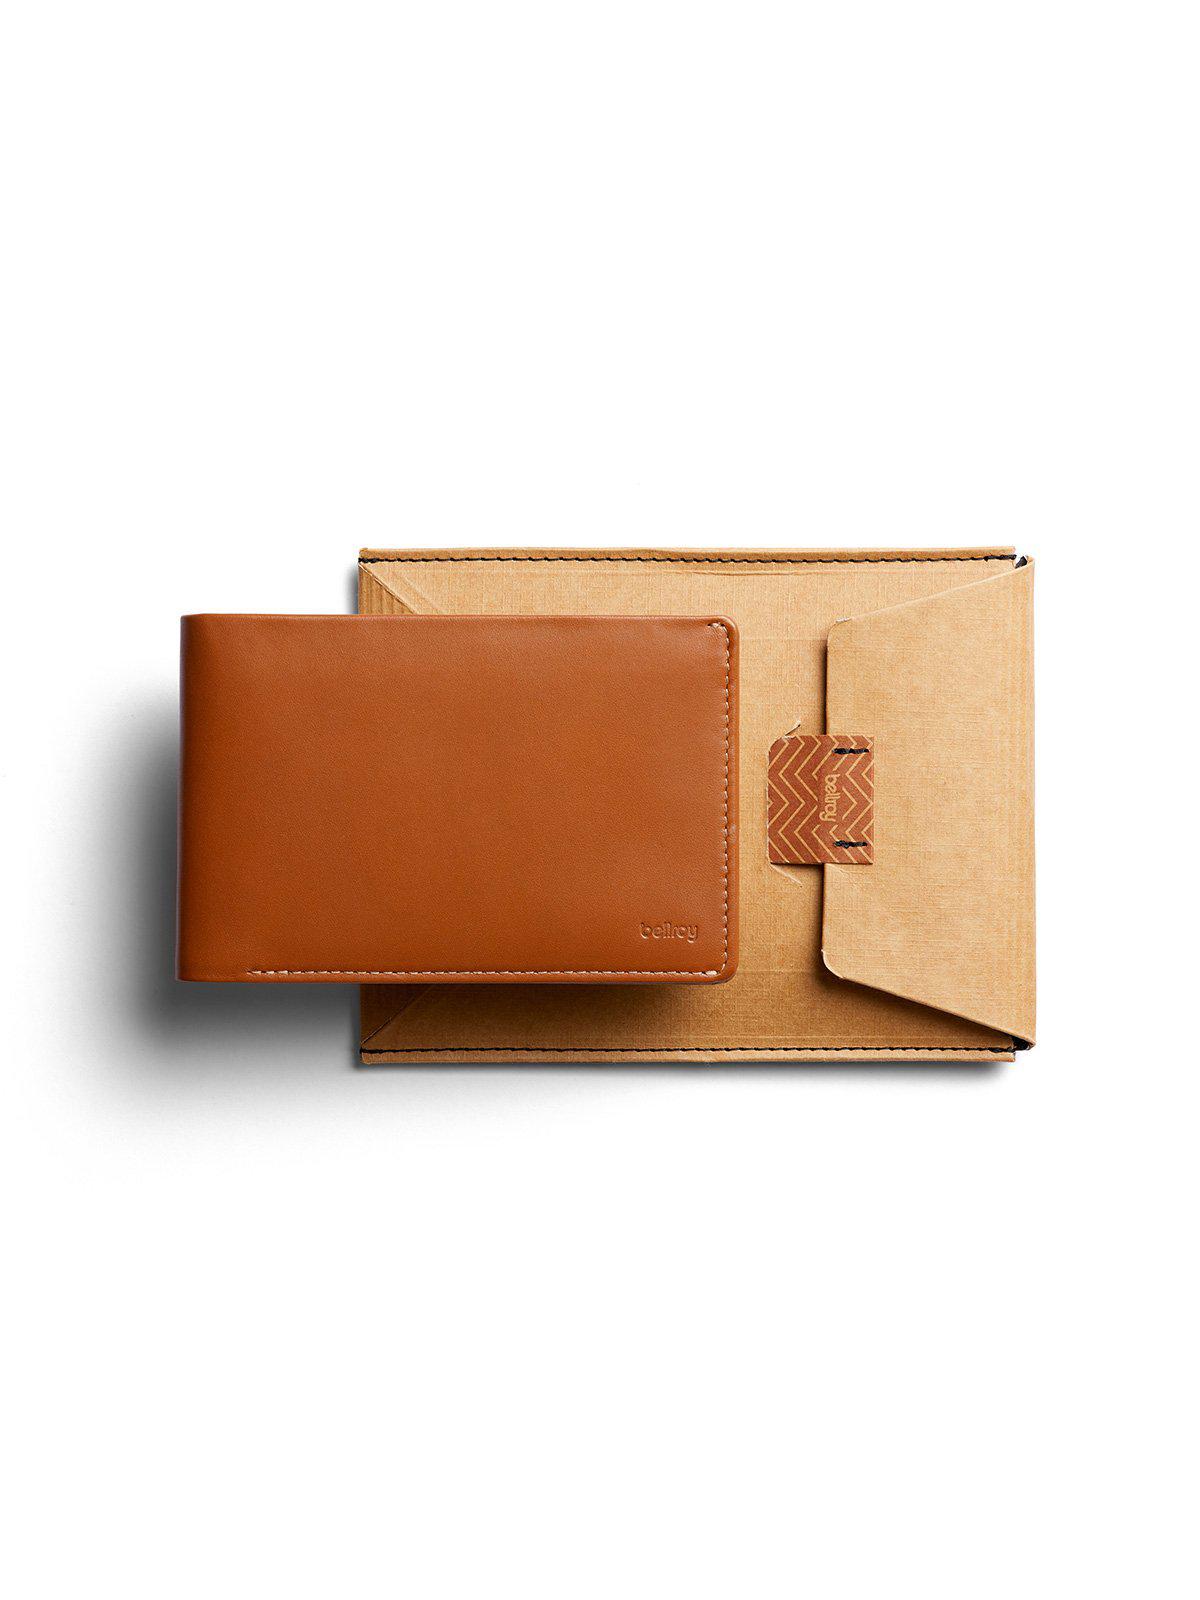 Bellroy Travel Wallet Caramel RFID - MORE by Morello Indonesia